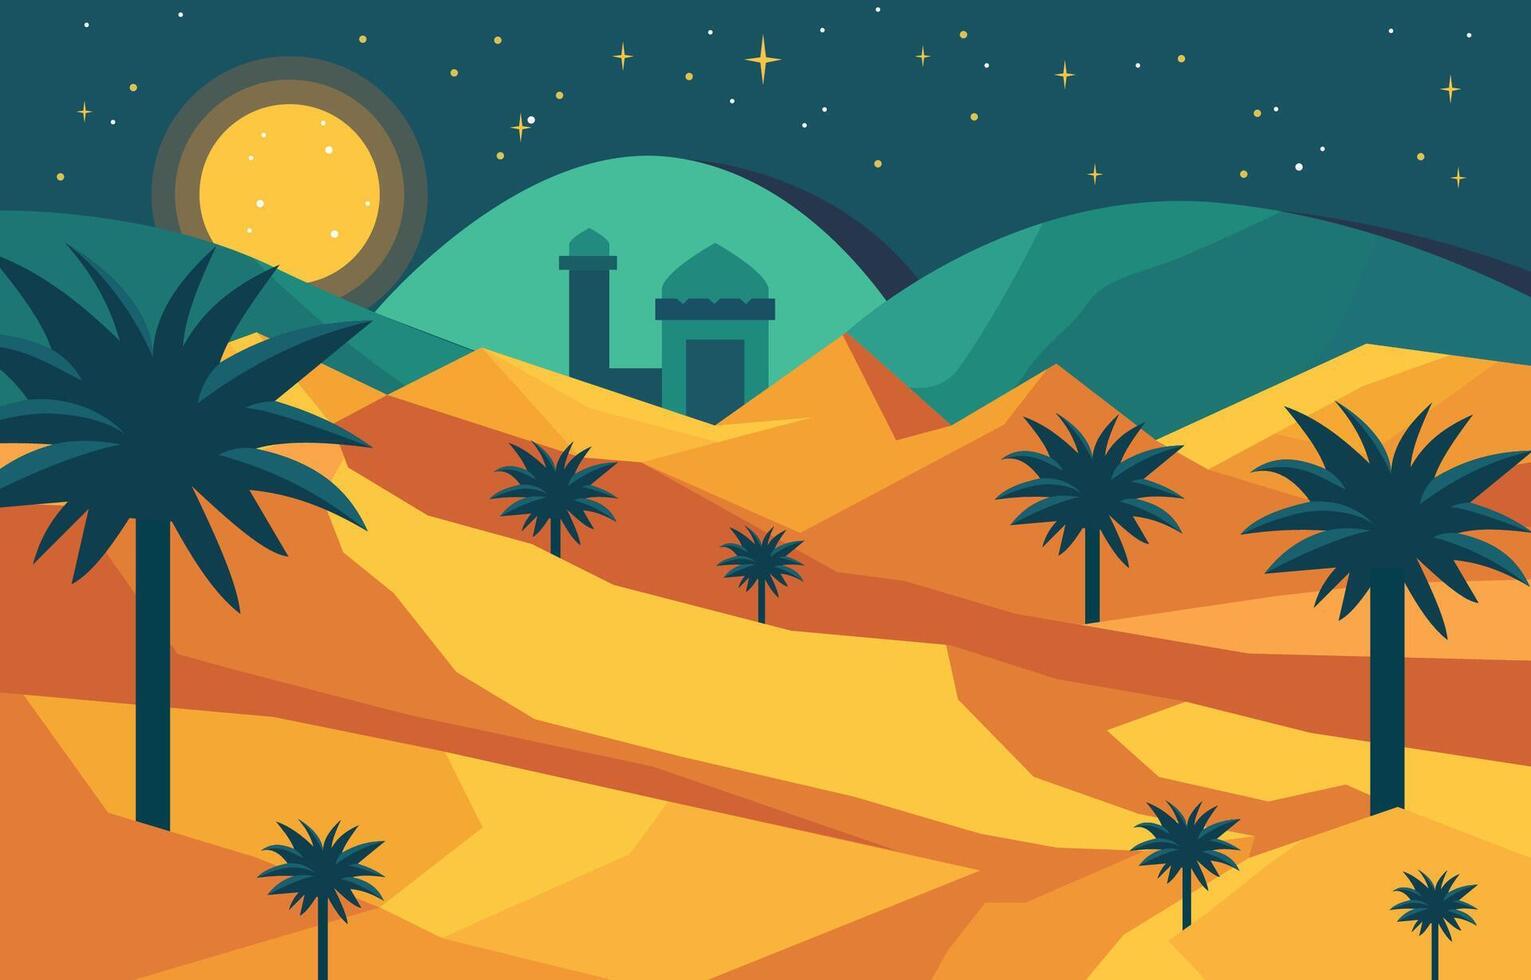 Flat Design Illustration of Mosque Building with Date Trees in Arabian Desert at Night vector